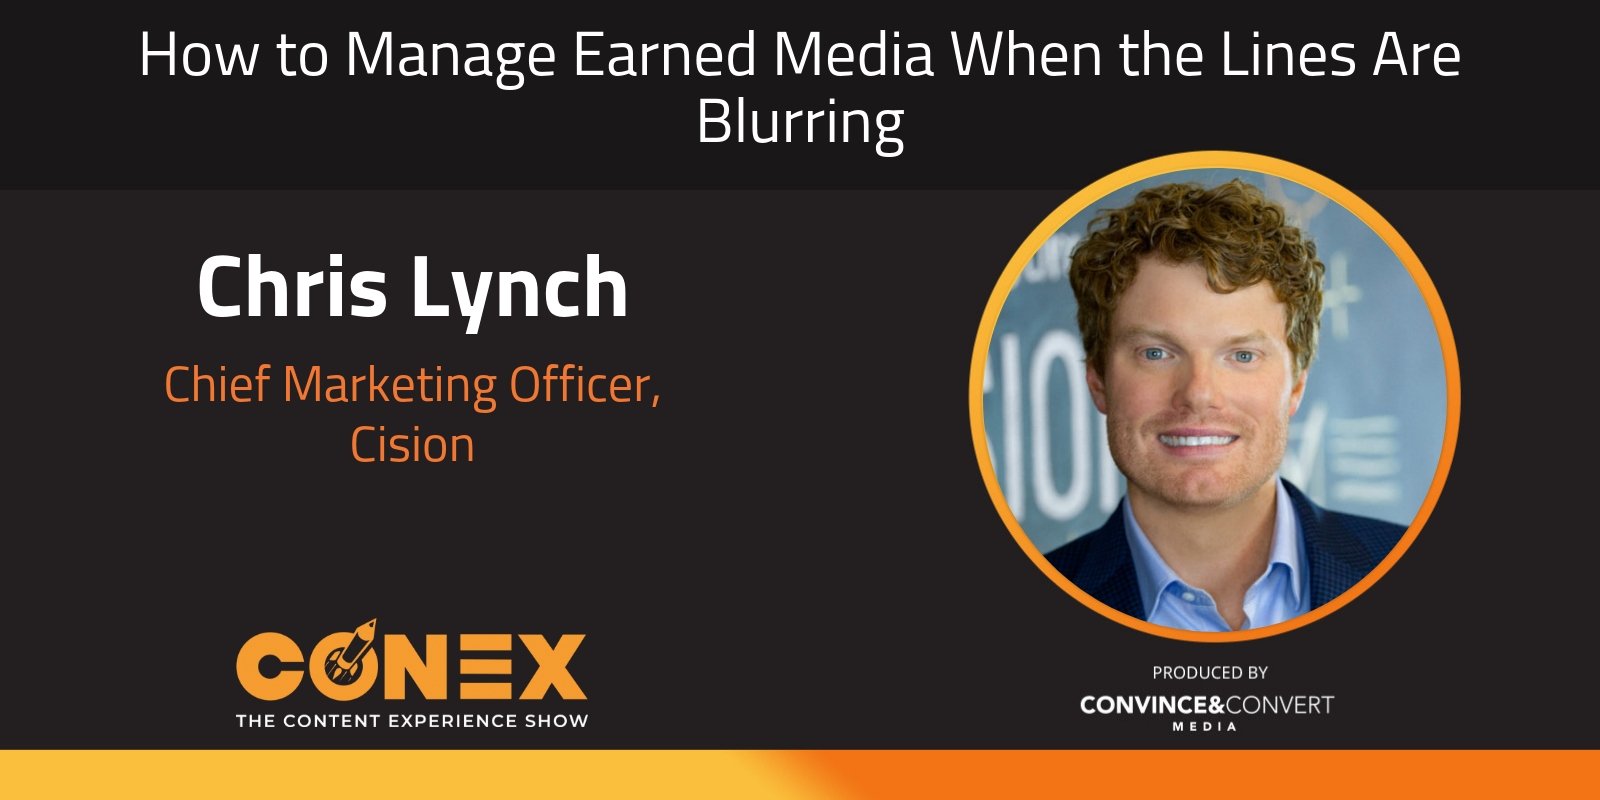 How to Manage Earned Media When the Lines Are Blurring